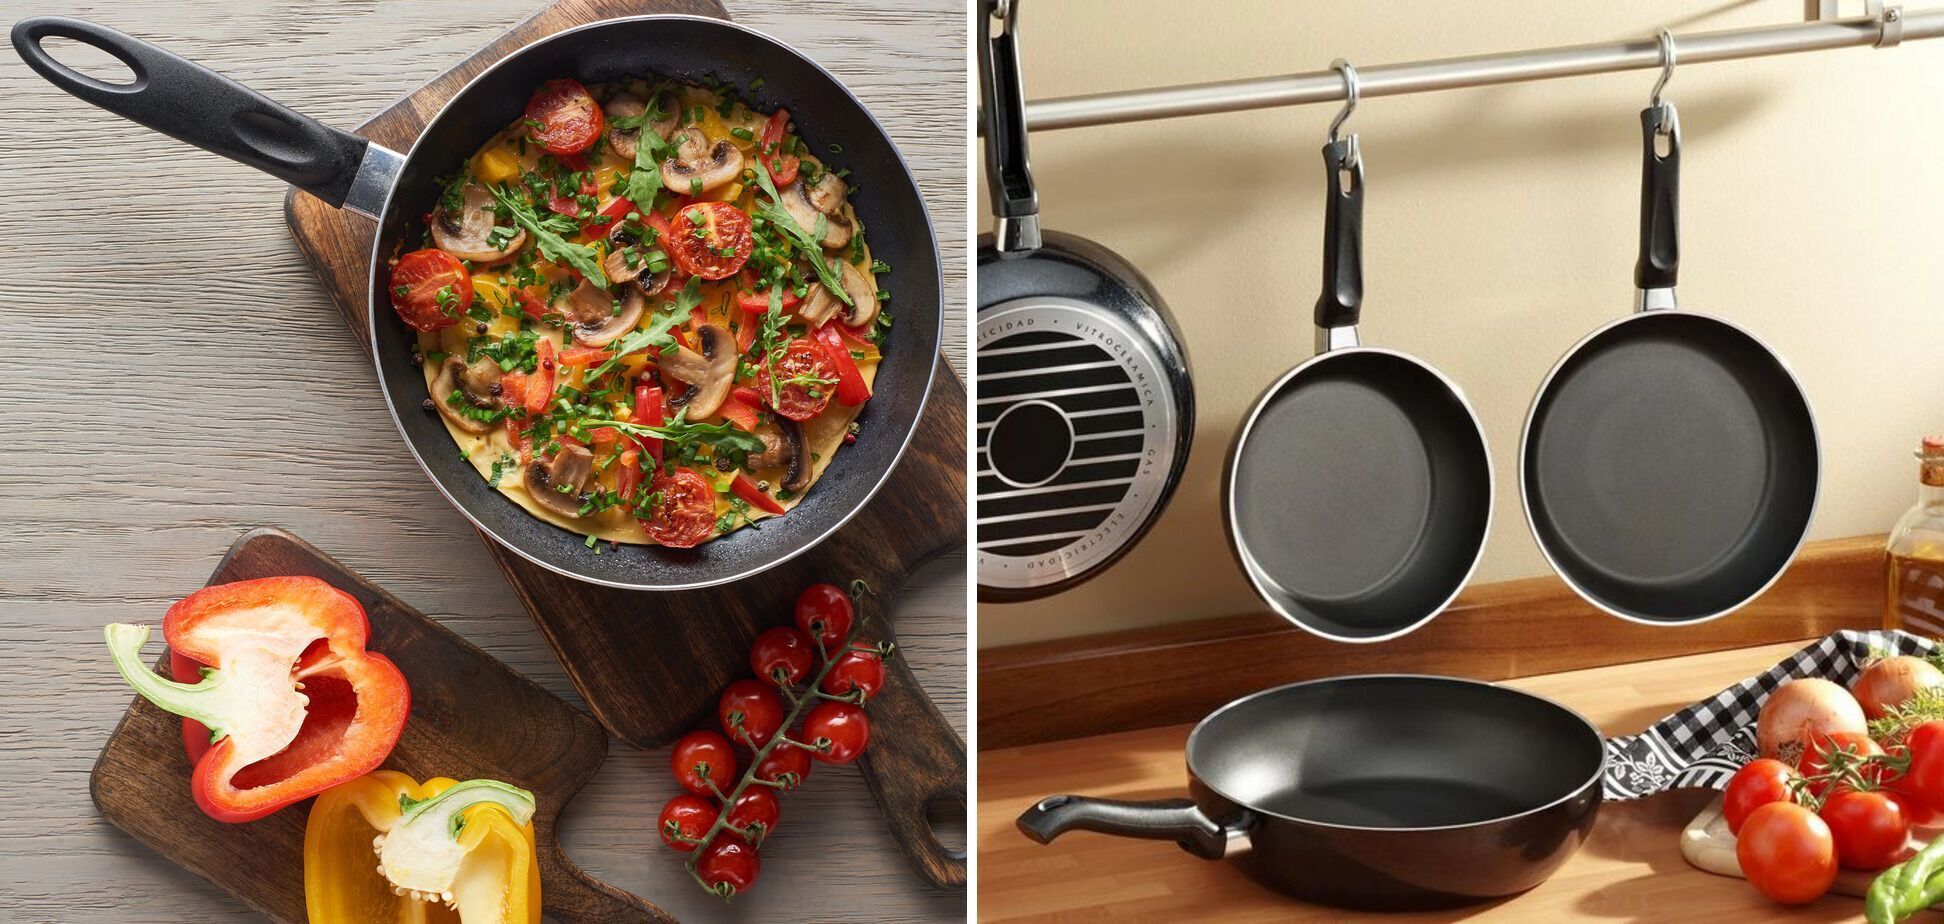 What to clean nonstick pans with